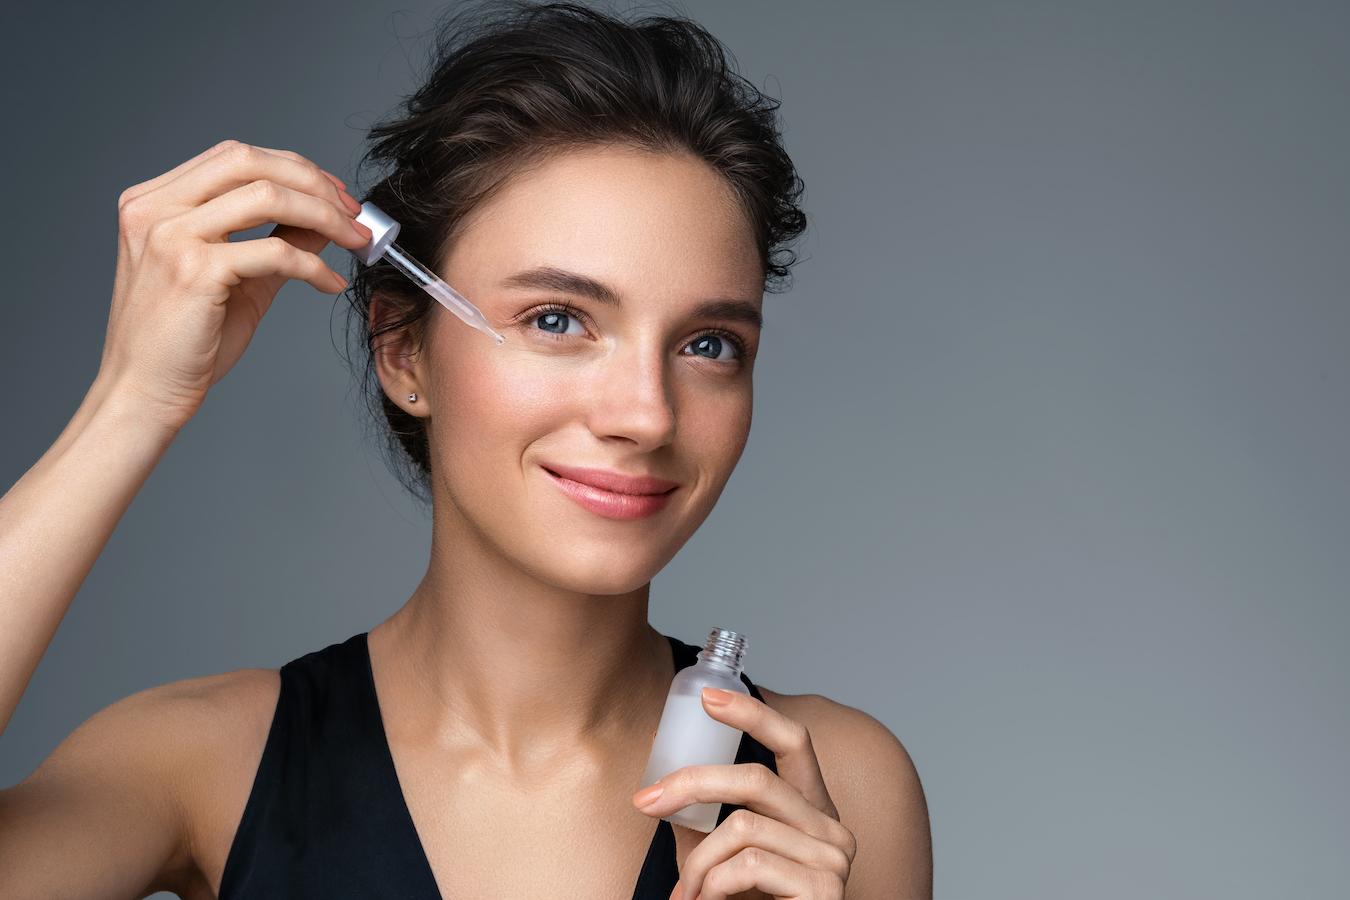 You can use a serum even if you have sensitive skin